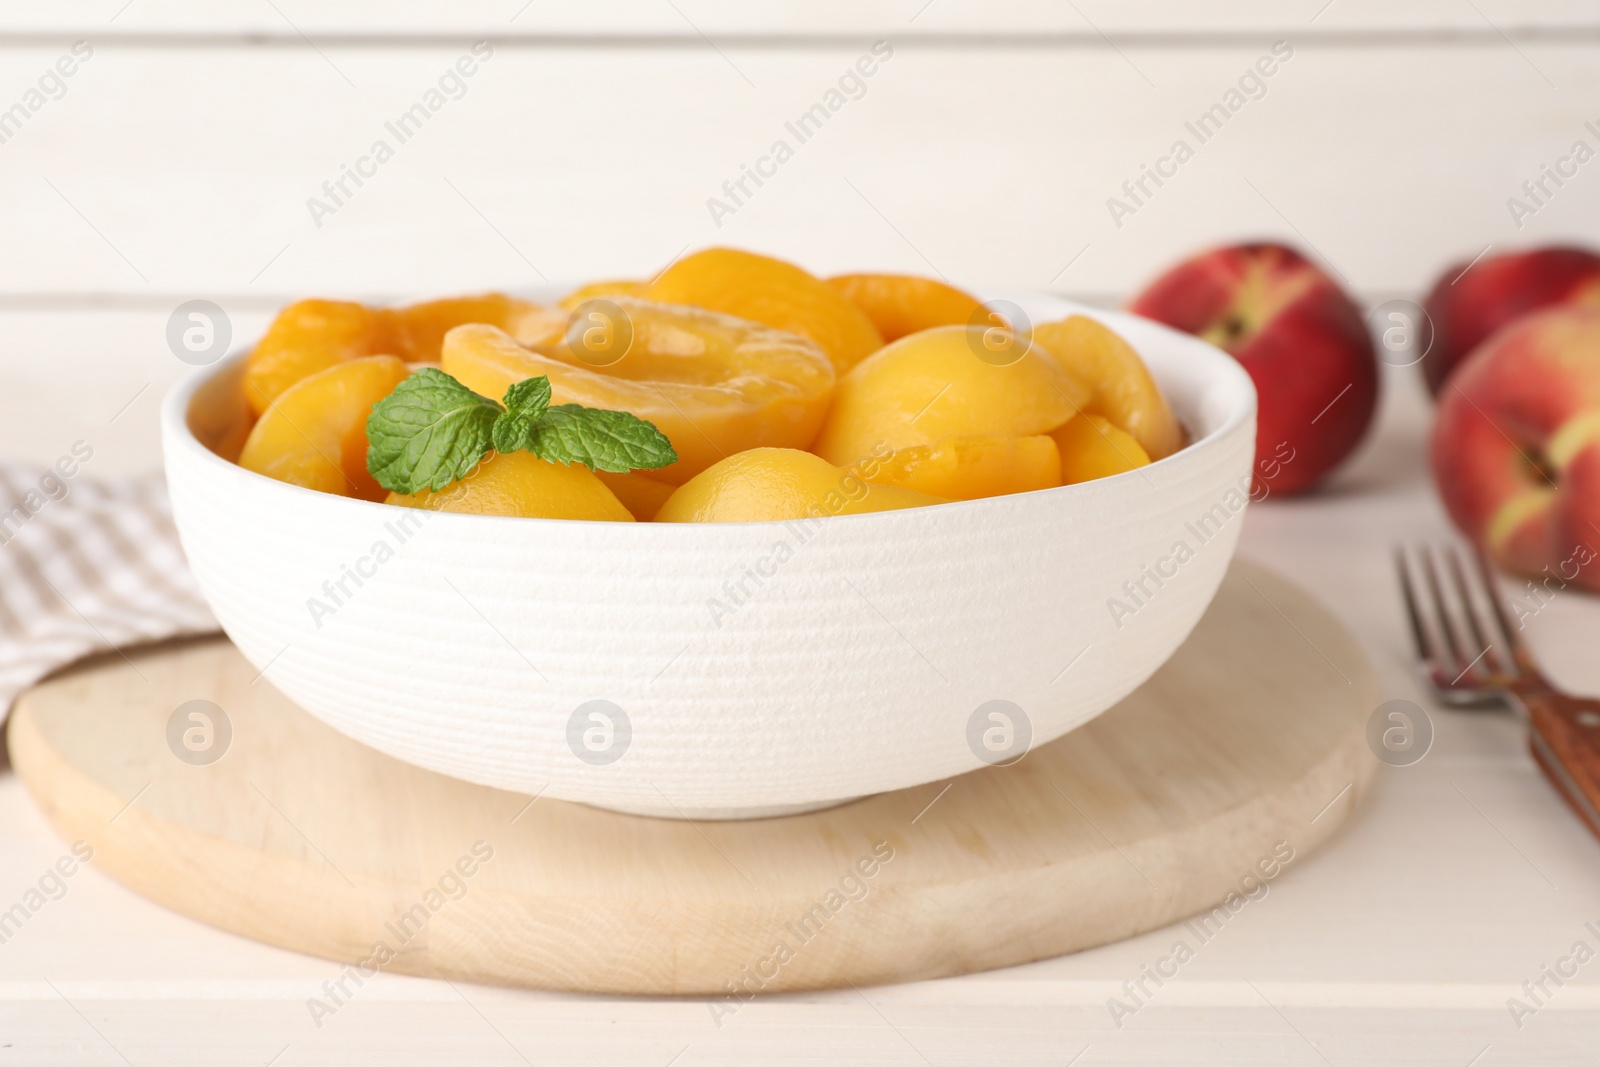 Photo of Canned peach halves in bowl on white table